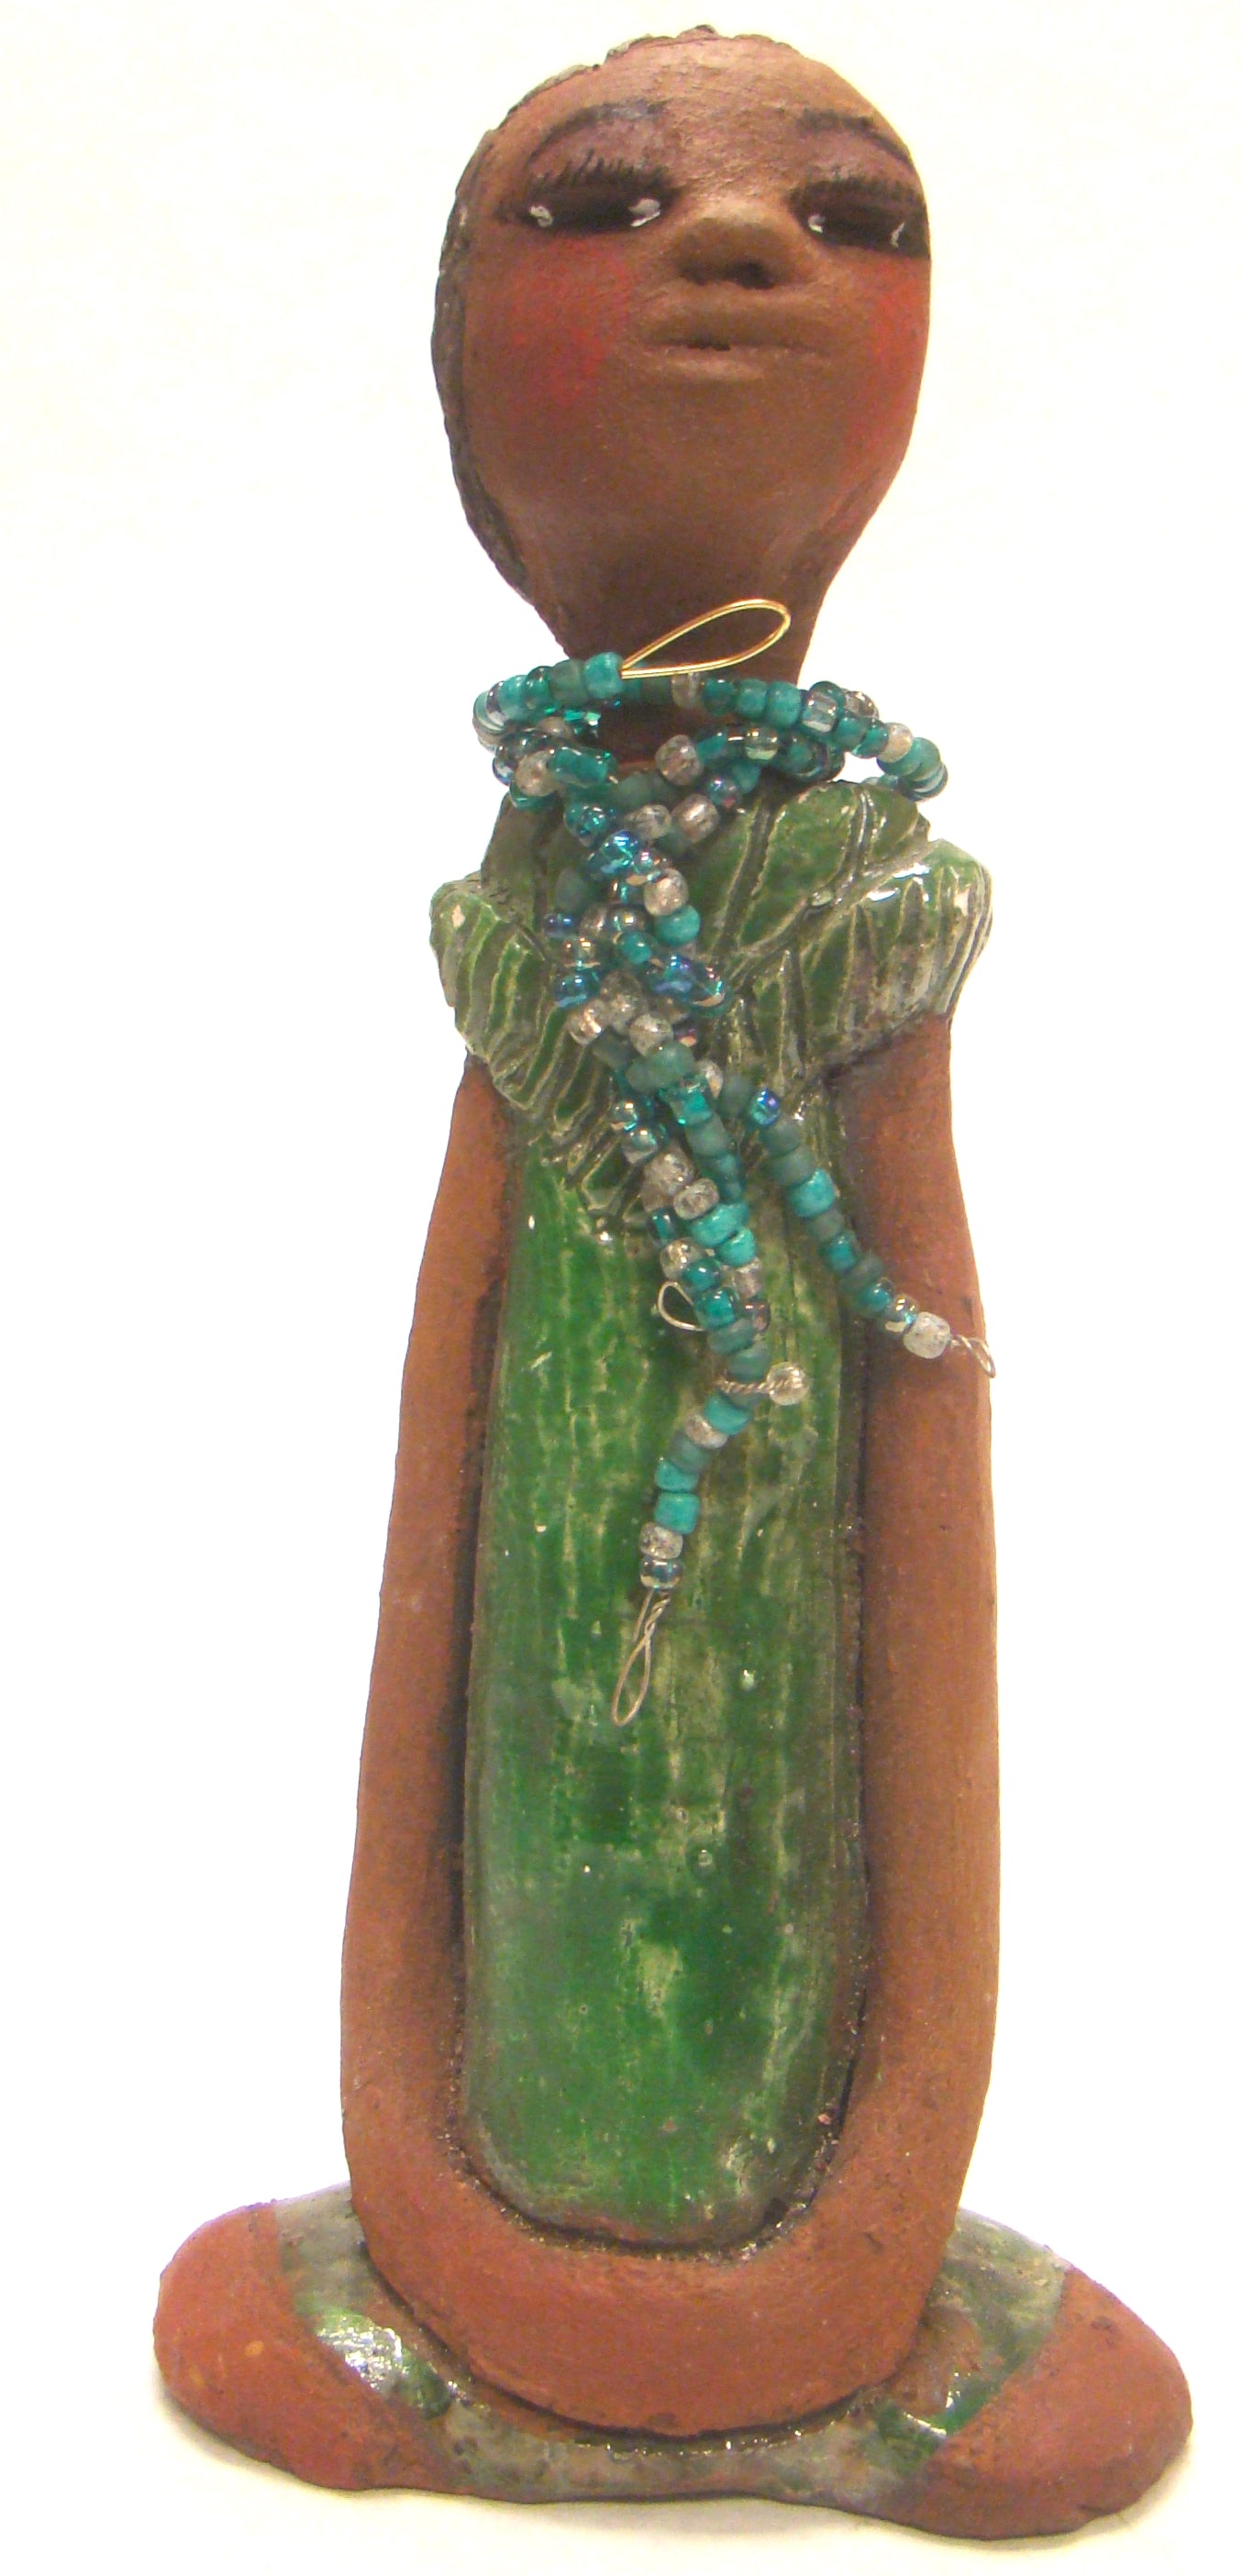      Fatou stands 9" x 4.5" x 2" and weighs 1.03 lbs.     She has a lovely honey brown complexion and long loving arms.     Fatou has an emerald glazed dress with a strand of multicolored beads.     Her hair is raku smokey black and is etched in clay.     Fatou is eye catching and will grace your surroundings.